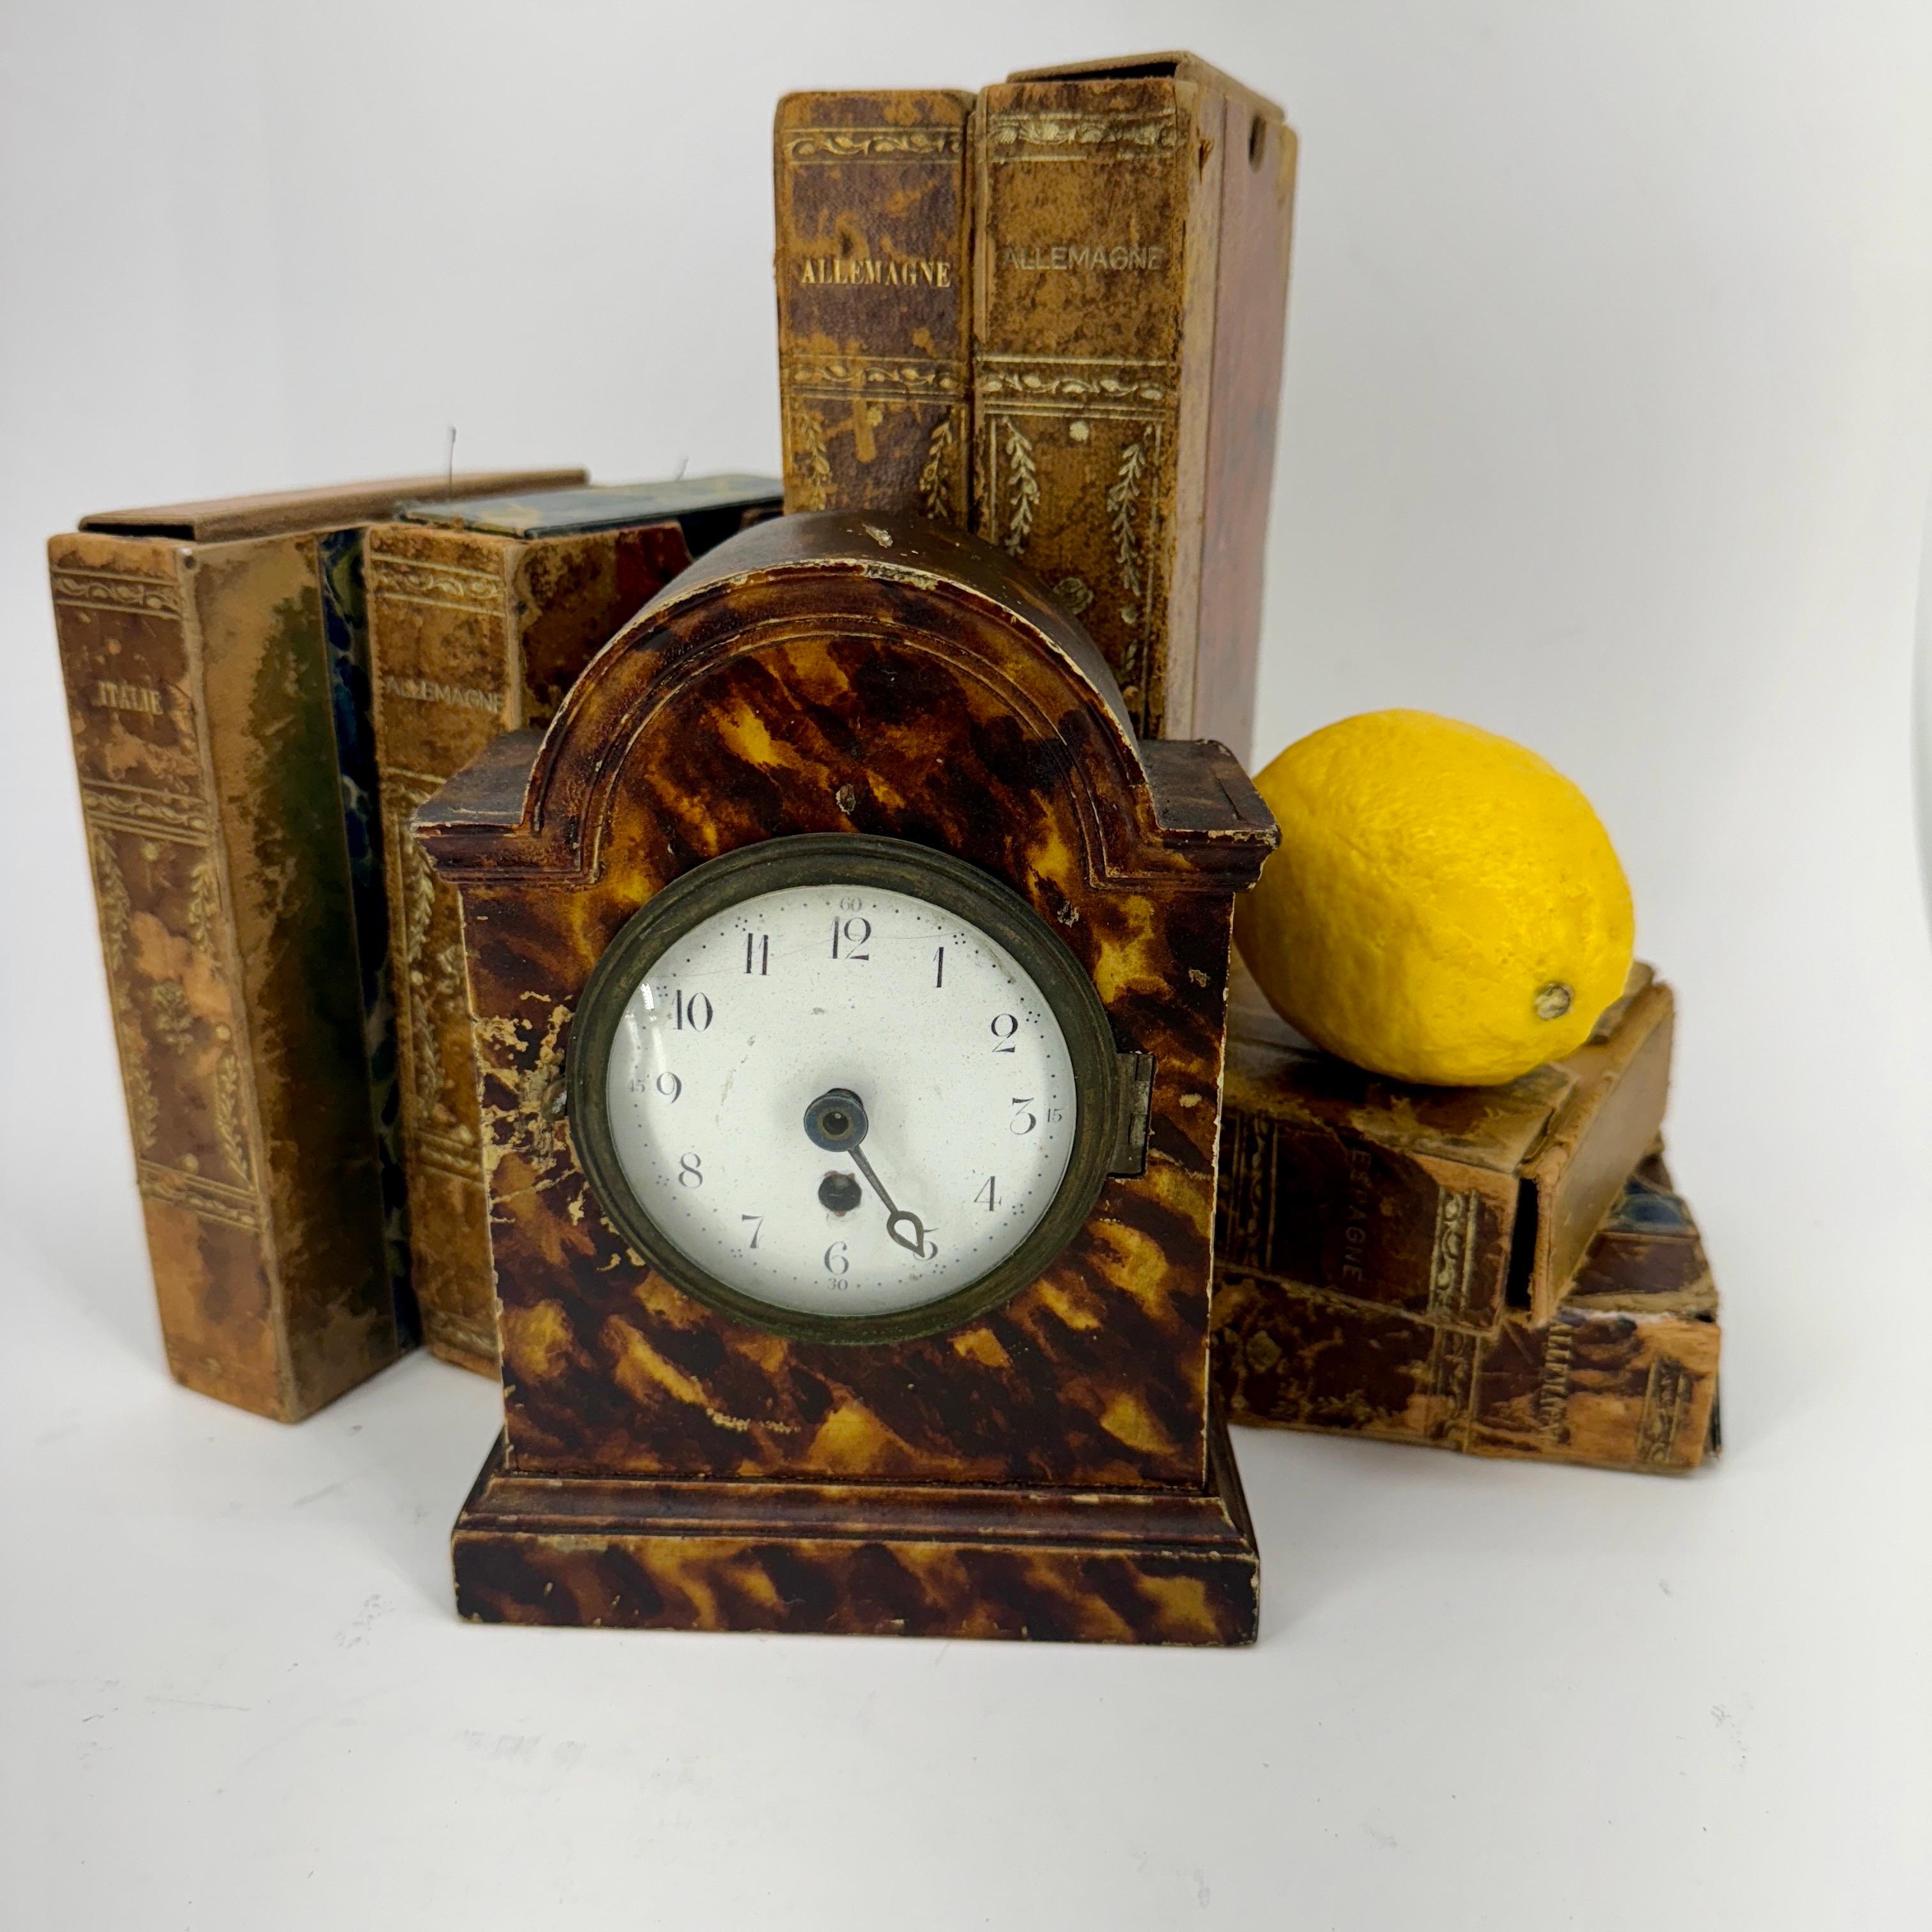 Decorative Faux Tortoiseshell Arched Table Clock, Early 1900's France.
 
Charming Small Table Clock with white enamel clock face from France. As found, this clock with all its character would be a wonderful addition to any home featuring a classic 